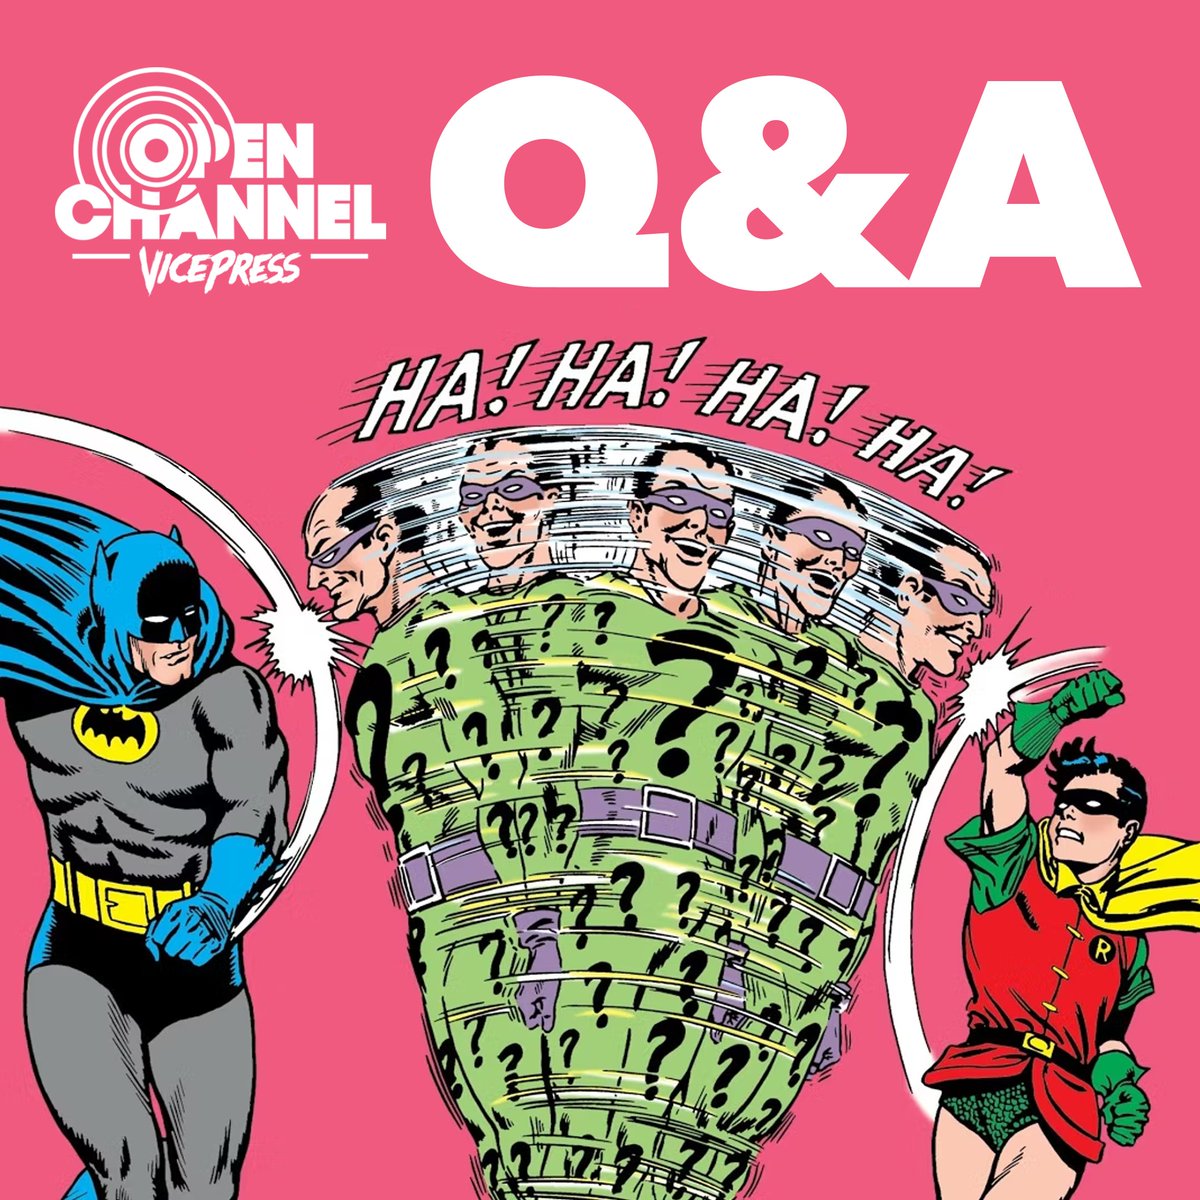 The latest episode of Open Channel is now live with @Cakes_Comics, @mrflorey & James! This week the question floodgates opened & we got a whole heap from you, the listener! Or viewer. Whatever. Watch on YouTube or listen on your Podcast provider of choice! Vice-Press.com/openchannel